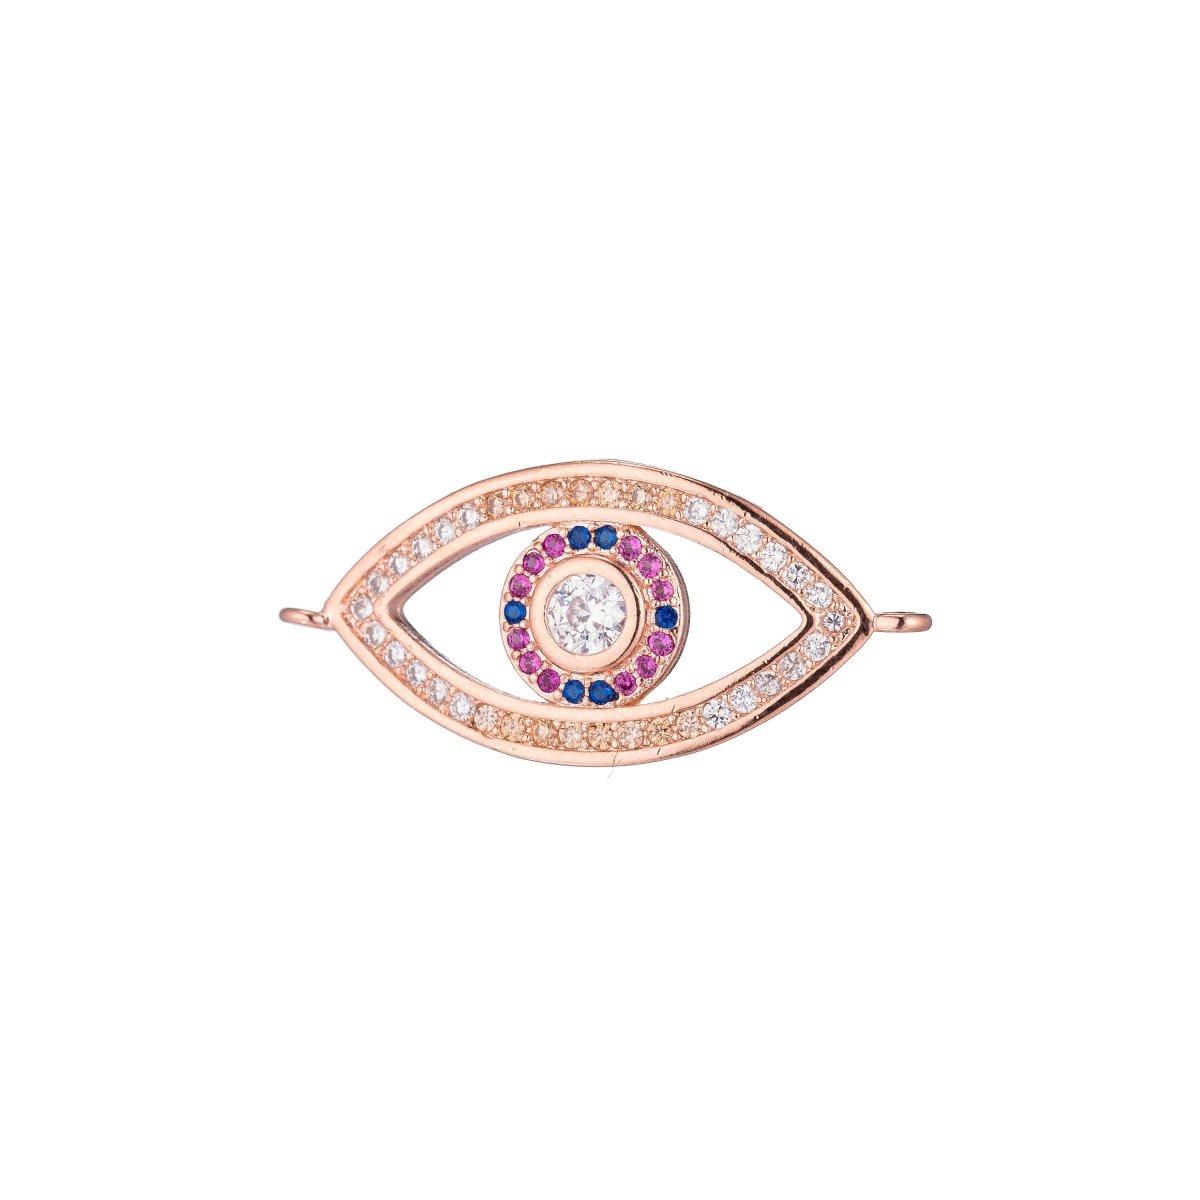 DEL- Rose gold Evil Eye, Luck Lucky Charm, Fortunate in Life, Legend, Cubic Zirconia Bracelet Charm Bead Finding Connector For Jewelry Making F-252 - DLUXCA